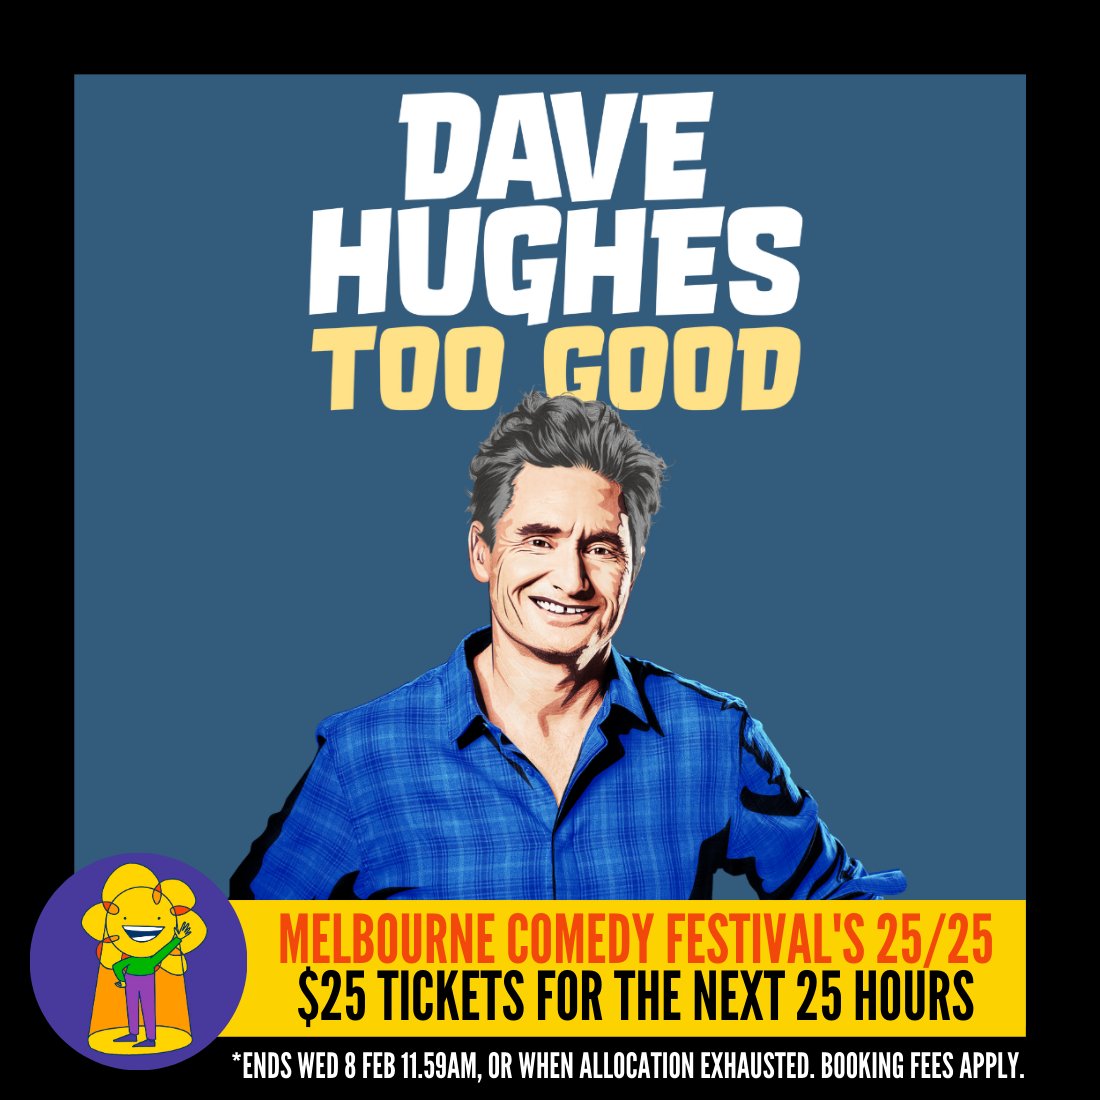 Melbourne Comedy Festival's 25/25 offer is now running! You can pick up $25 tickets to ‘Too Good’ on the dates listed below. Get in quick: the offer ends at 11.59am tomorrow or when the allocation is exhausted. 🗓️ March 30 & 31 | April 5, 6, 7, 9 🎟️ cmdy.live/MICF23DaveHugh…